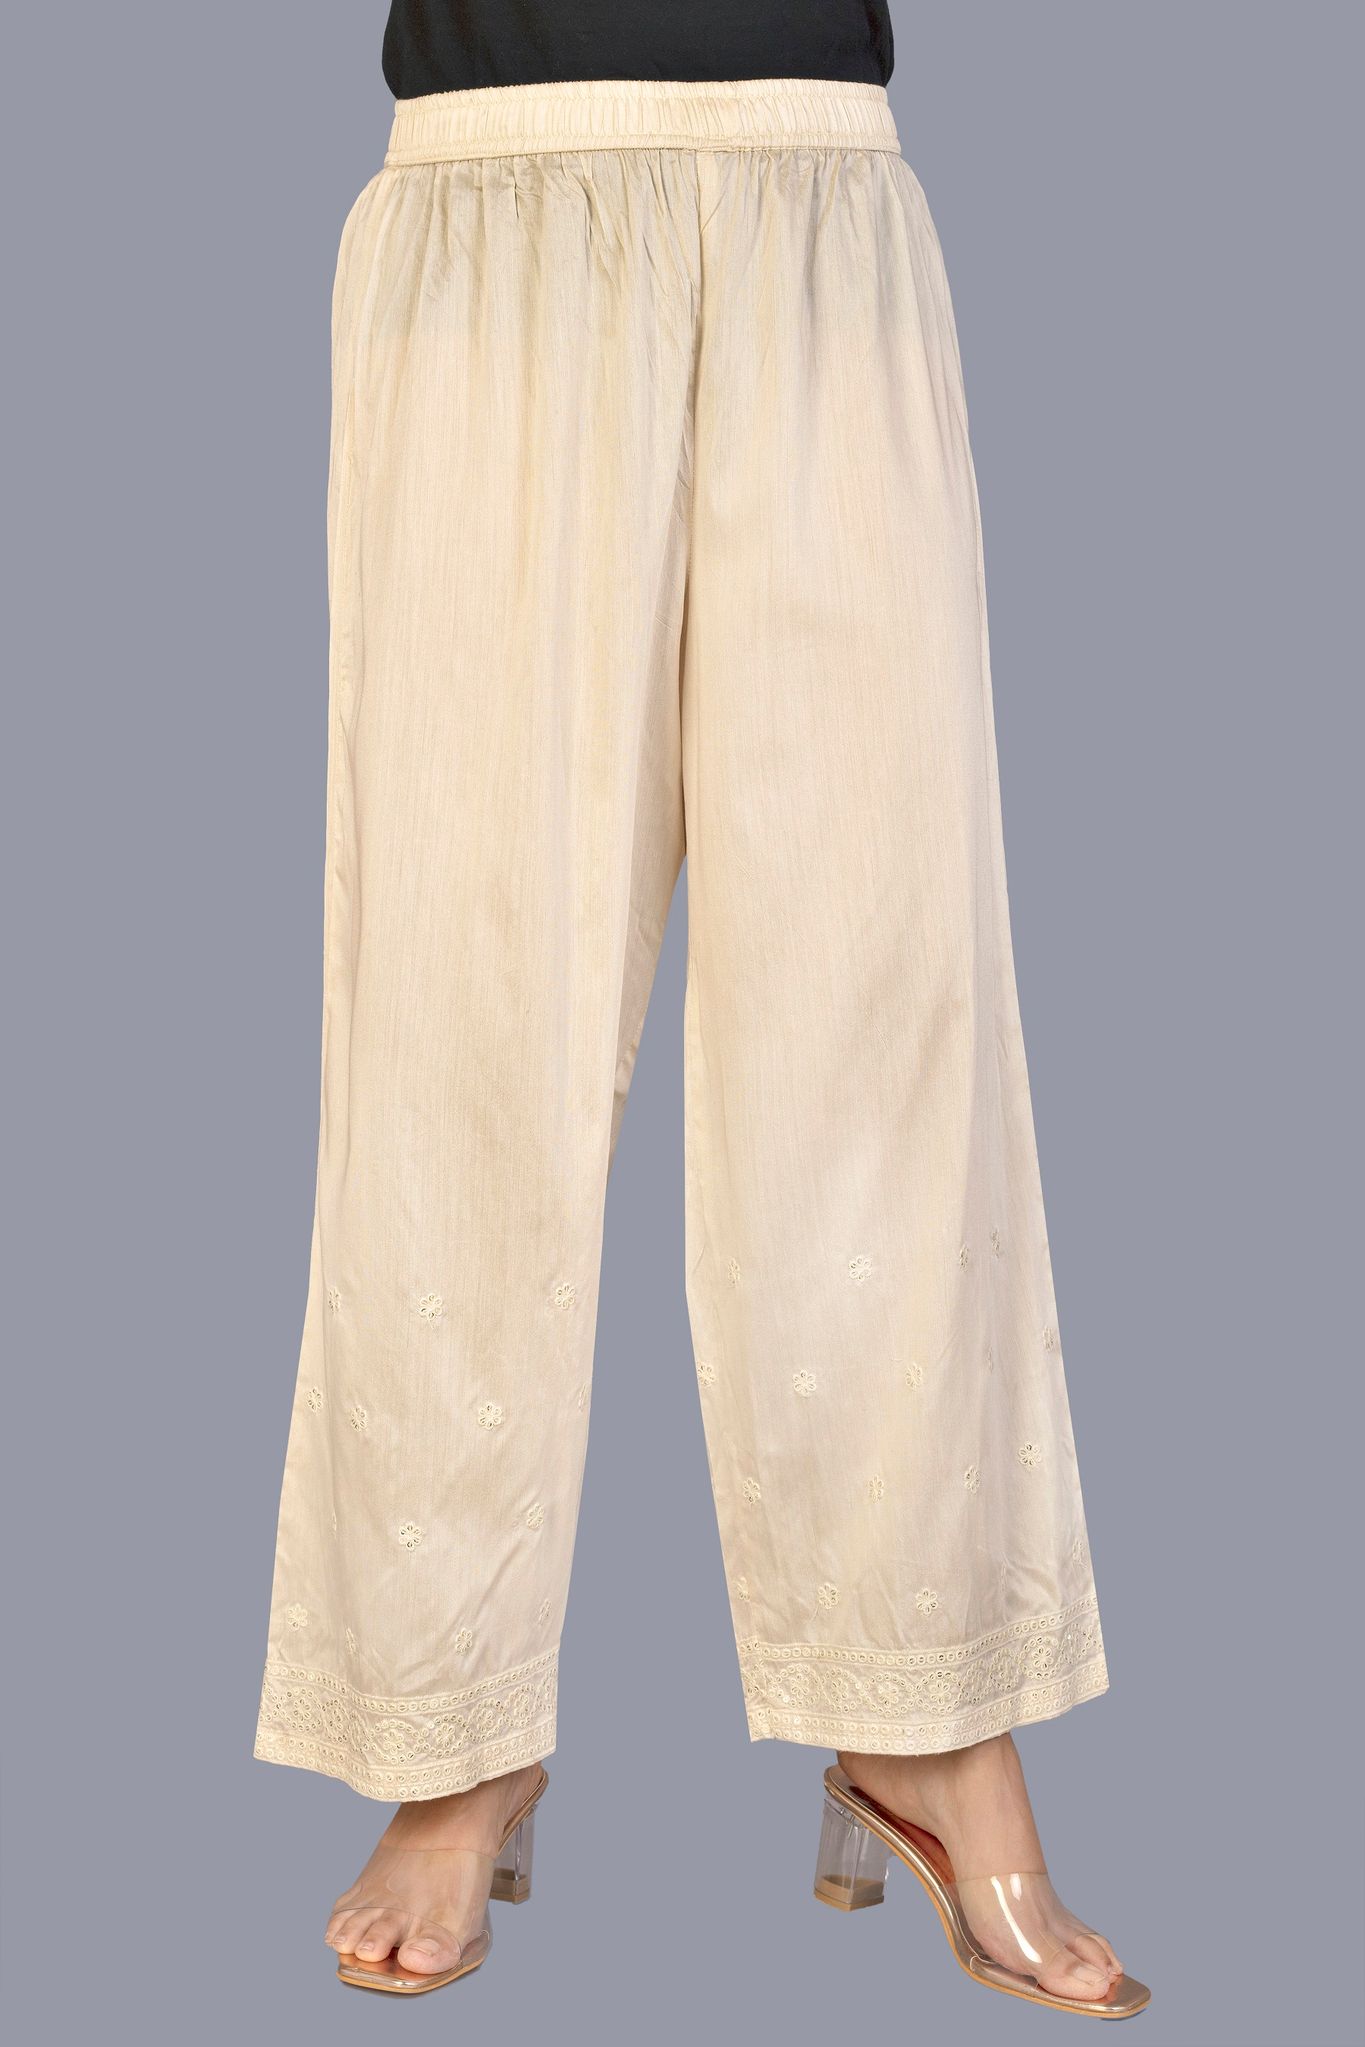 23 Best Palazzo Pants for Every Summer Occasion | Vogue-hkpdtq2012.edu.vn